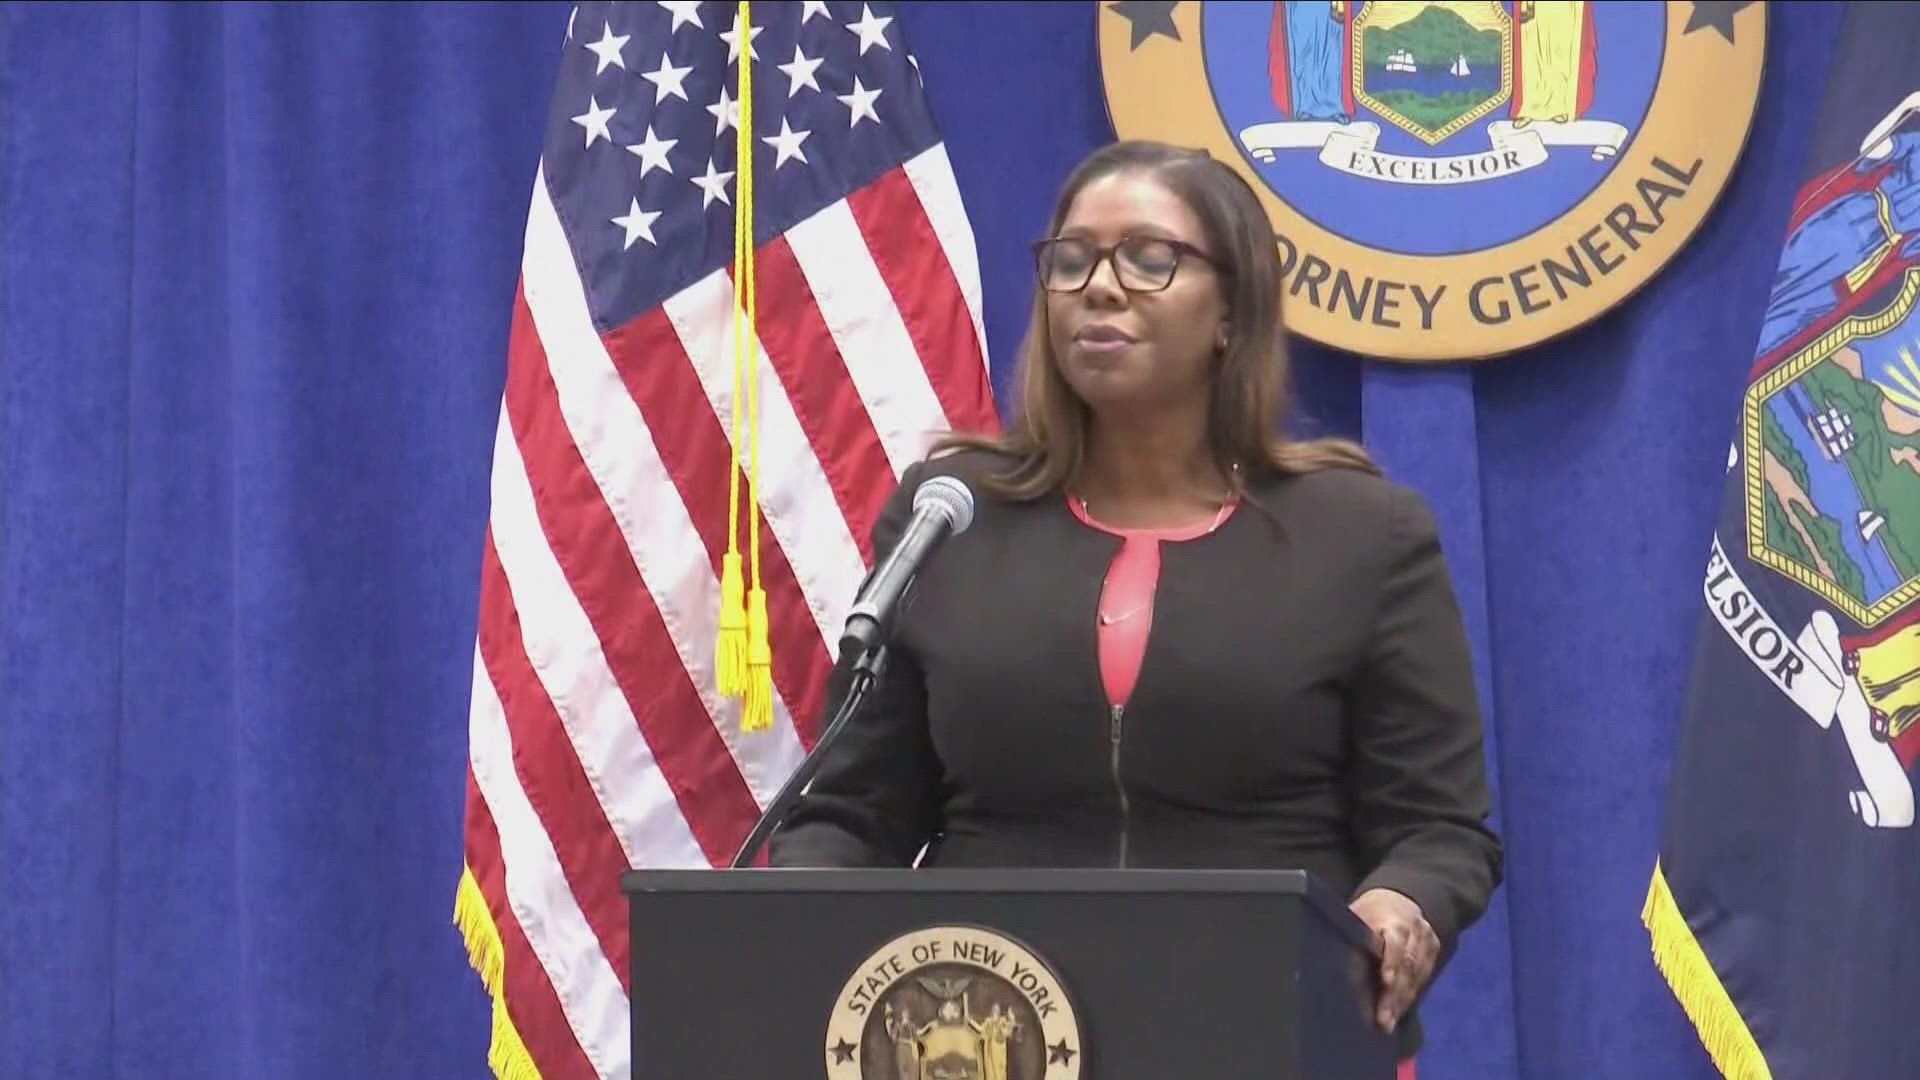 A woman who accused a former top adviser to New York Attorney General Letitia James of unwanted kissing filed a lawsuit Tuesday.